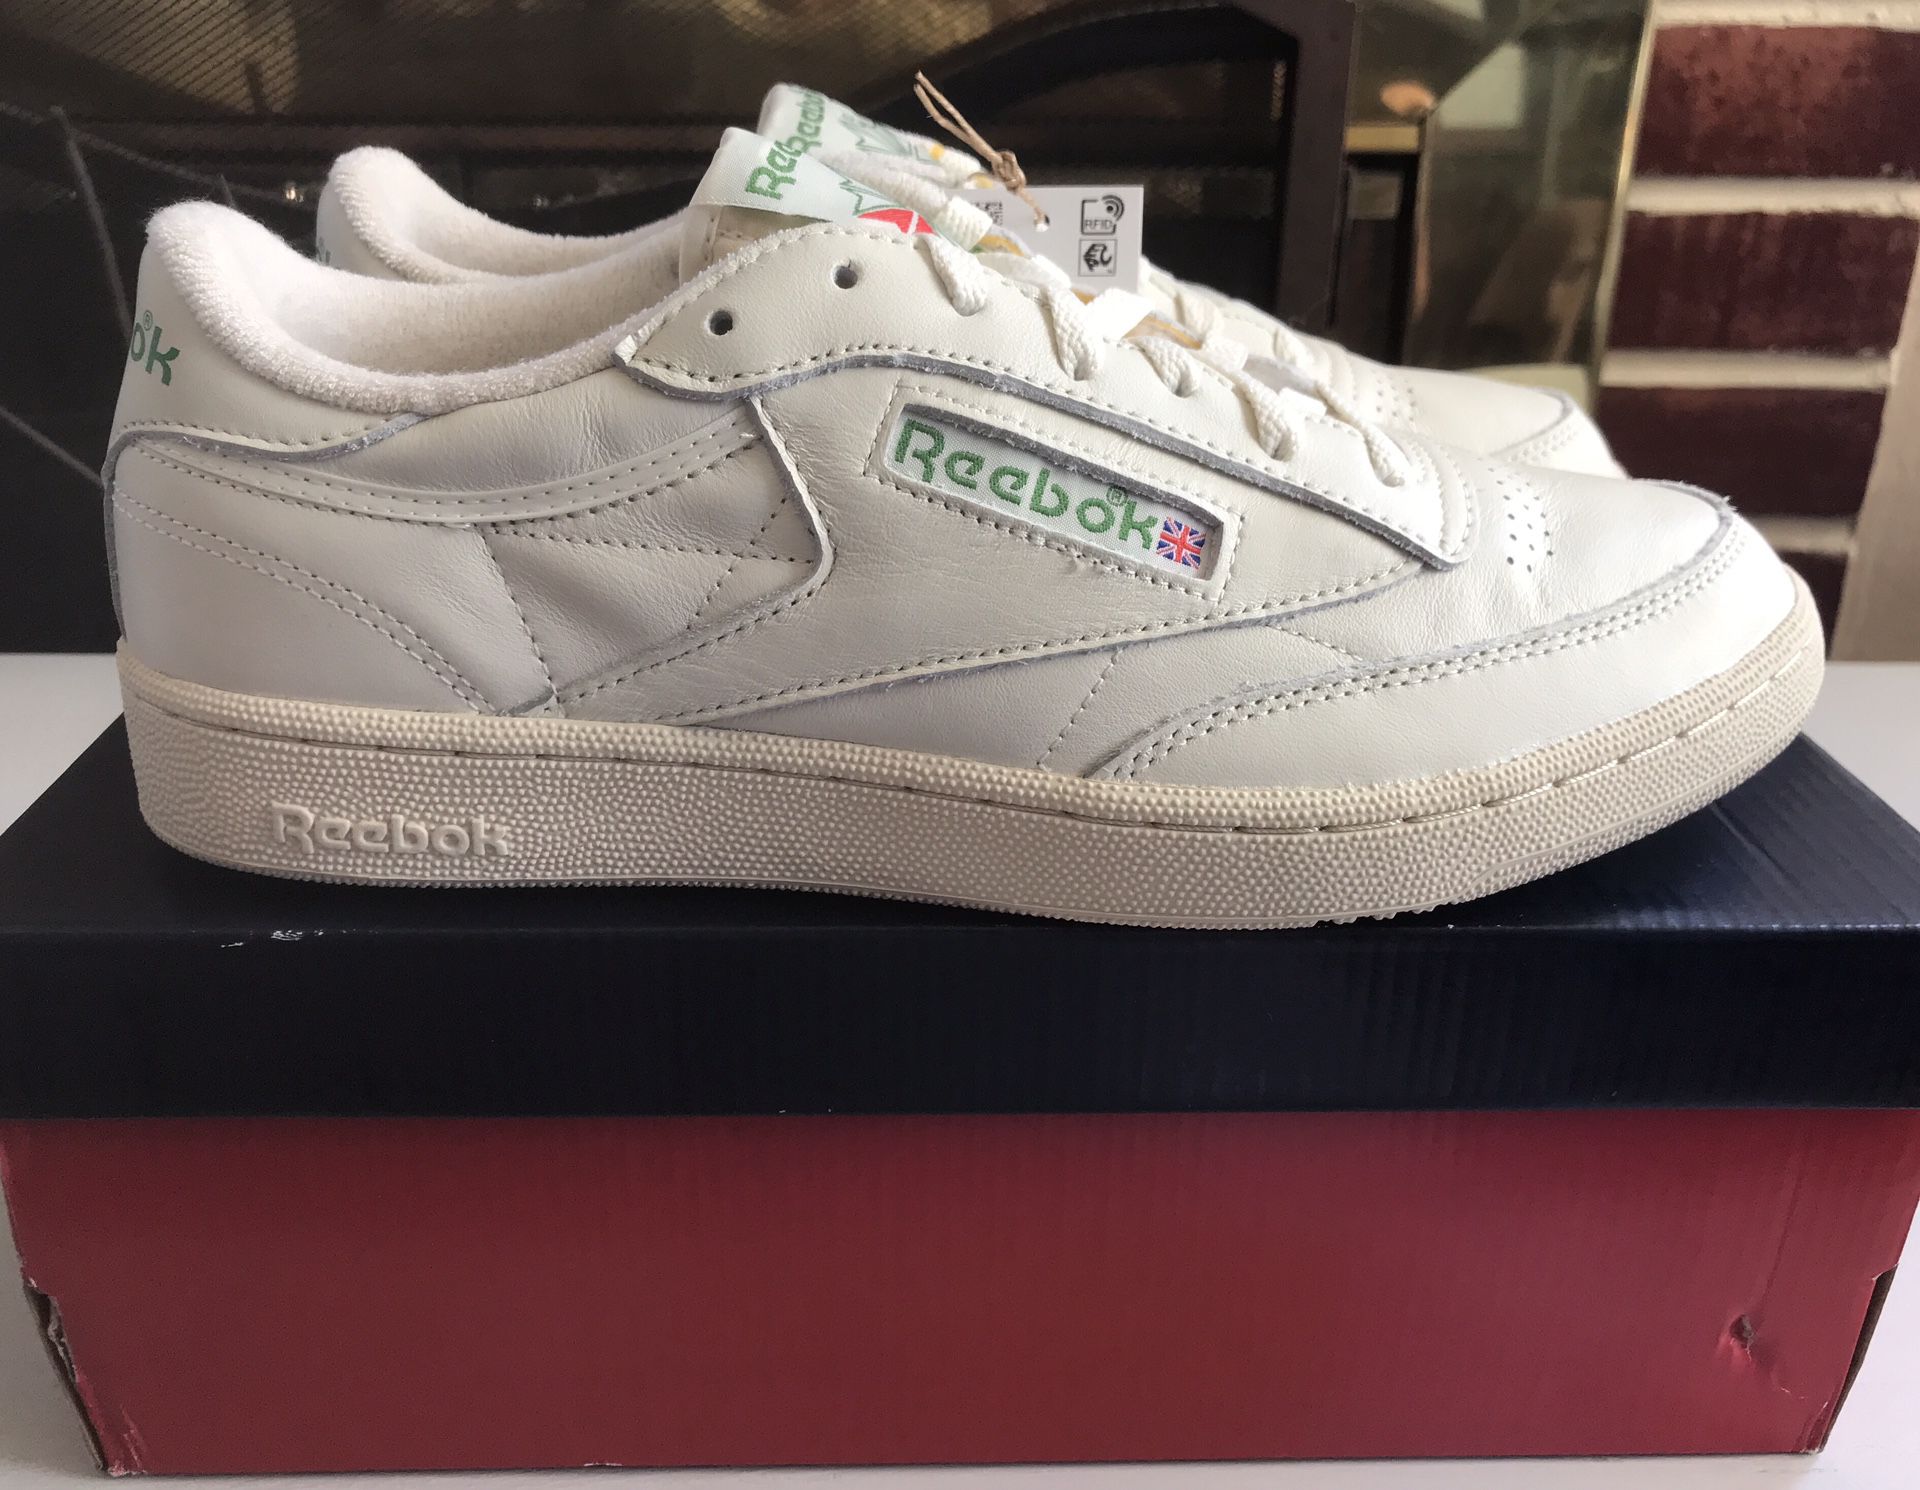 (1 AVAILABLE) MEN'S REEBOK CLUB C 85 VINTAGE SNEAKERS - 10 (MSRP: $85) for Sale Compton, CA - OfferUp